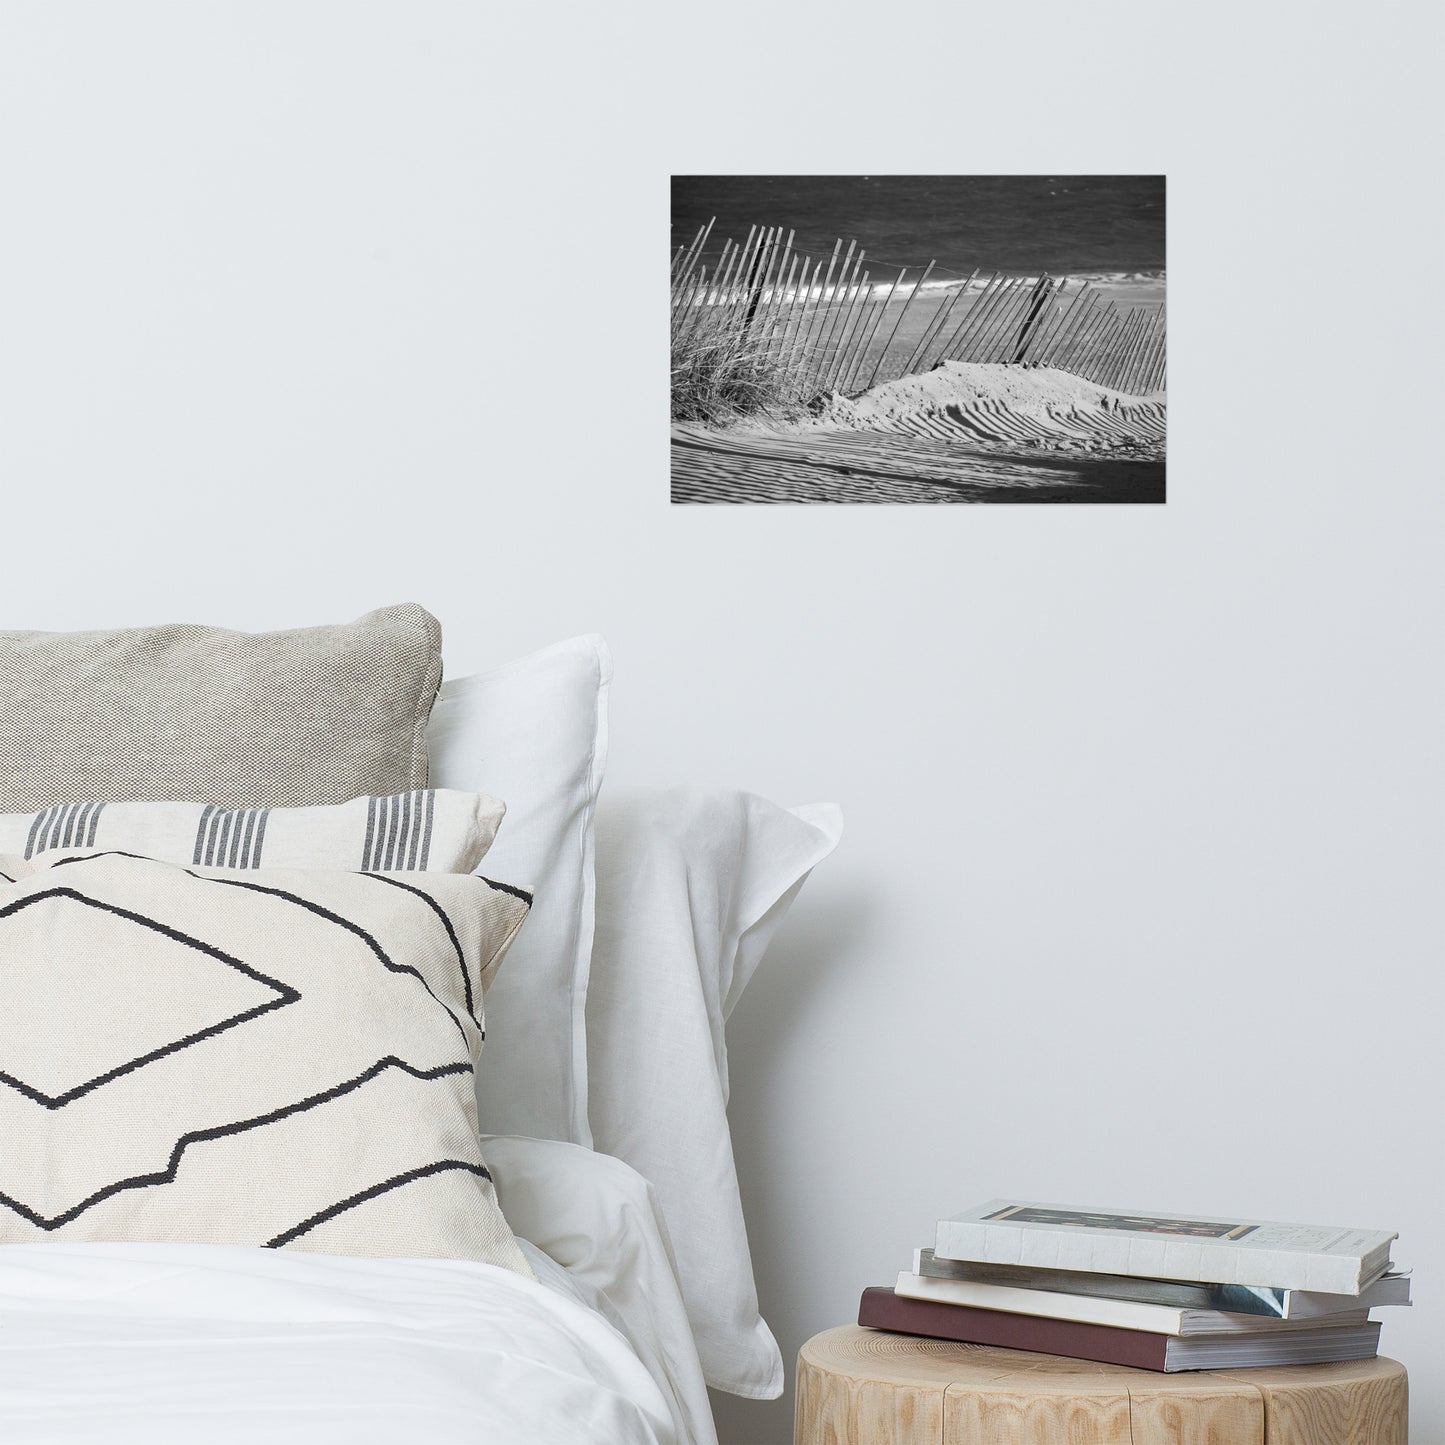 Sandy Beach Fence Black and White Landscape Photo Loose Wall Art Prints